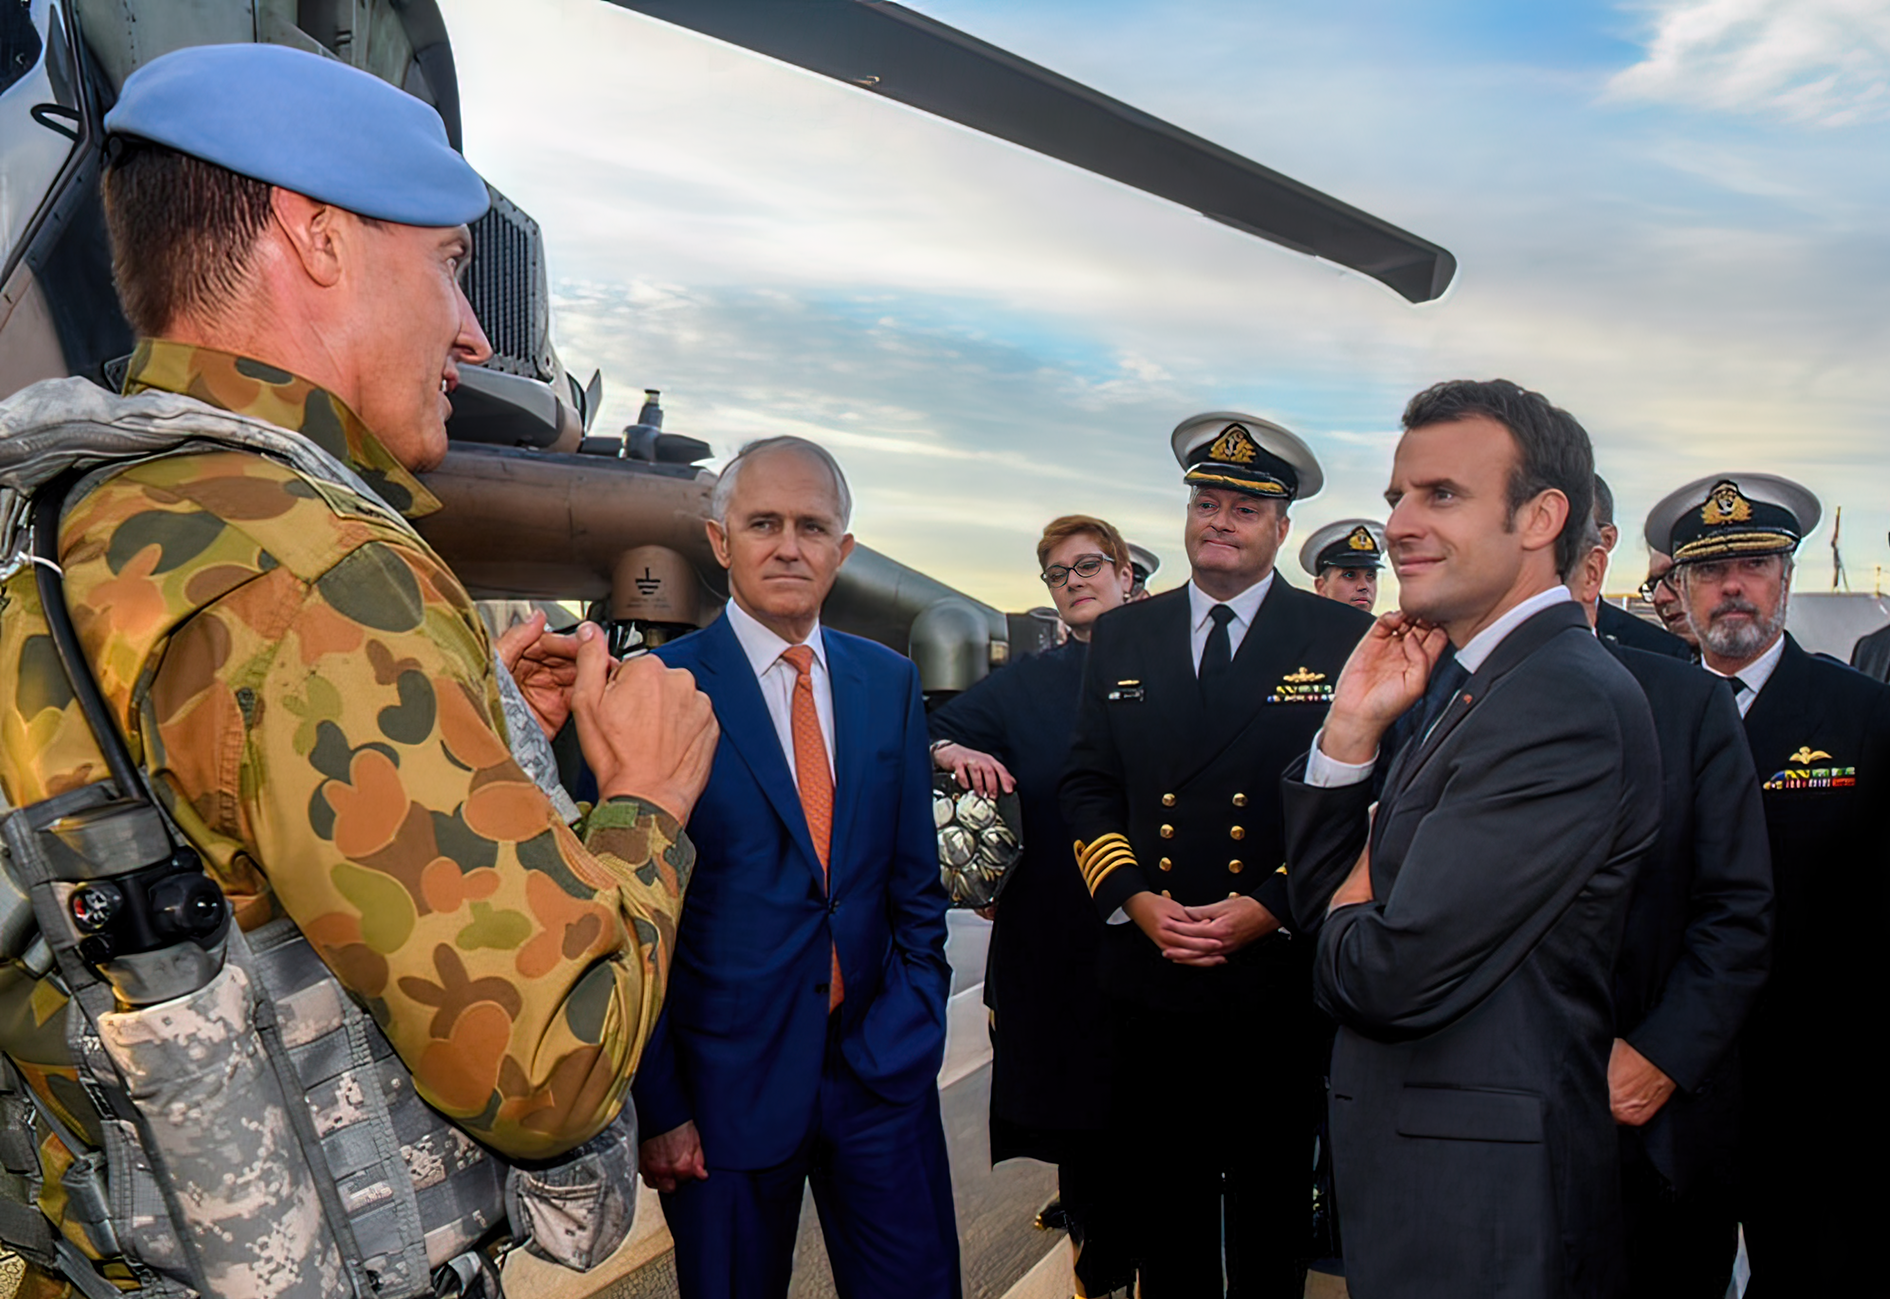 High Quality Aust Army Aviation Pilot Speaks with Macron about ARH Blank Meme Template